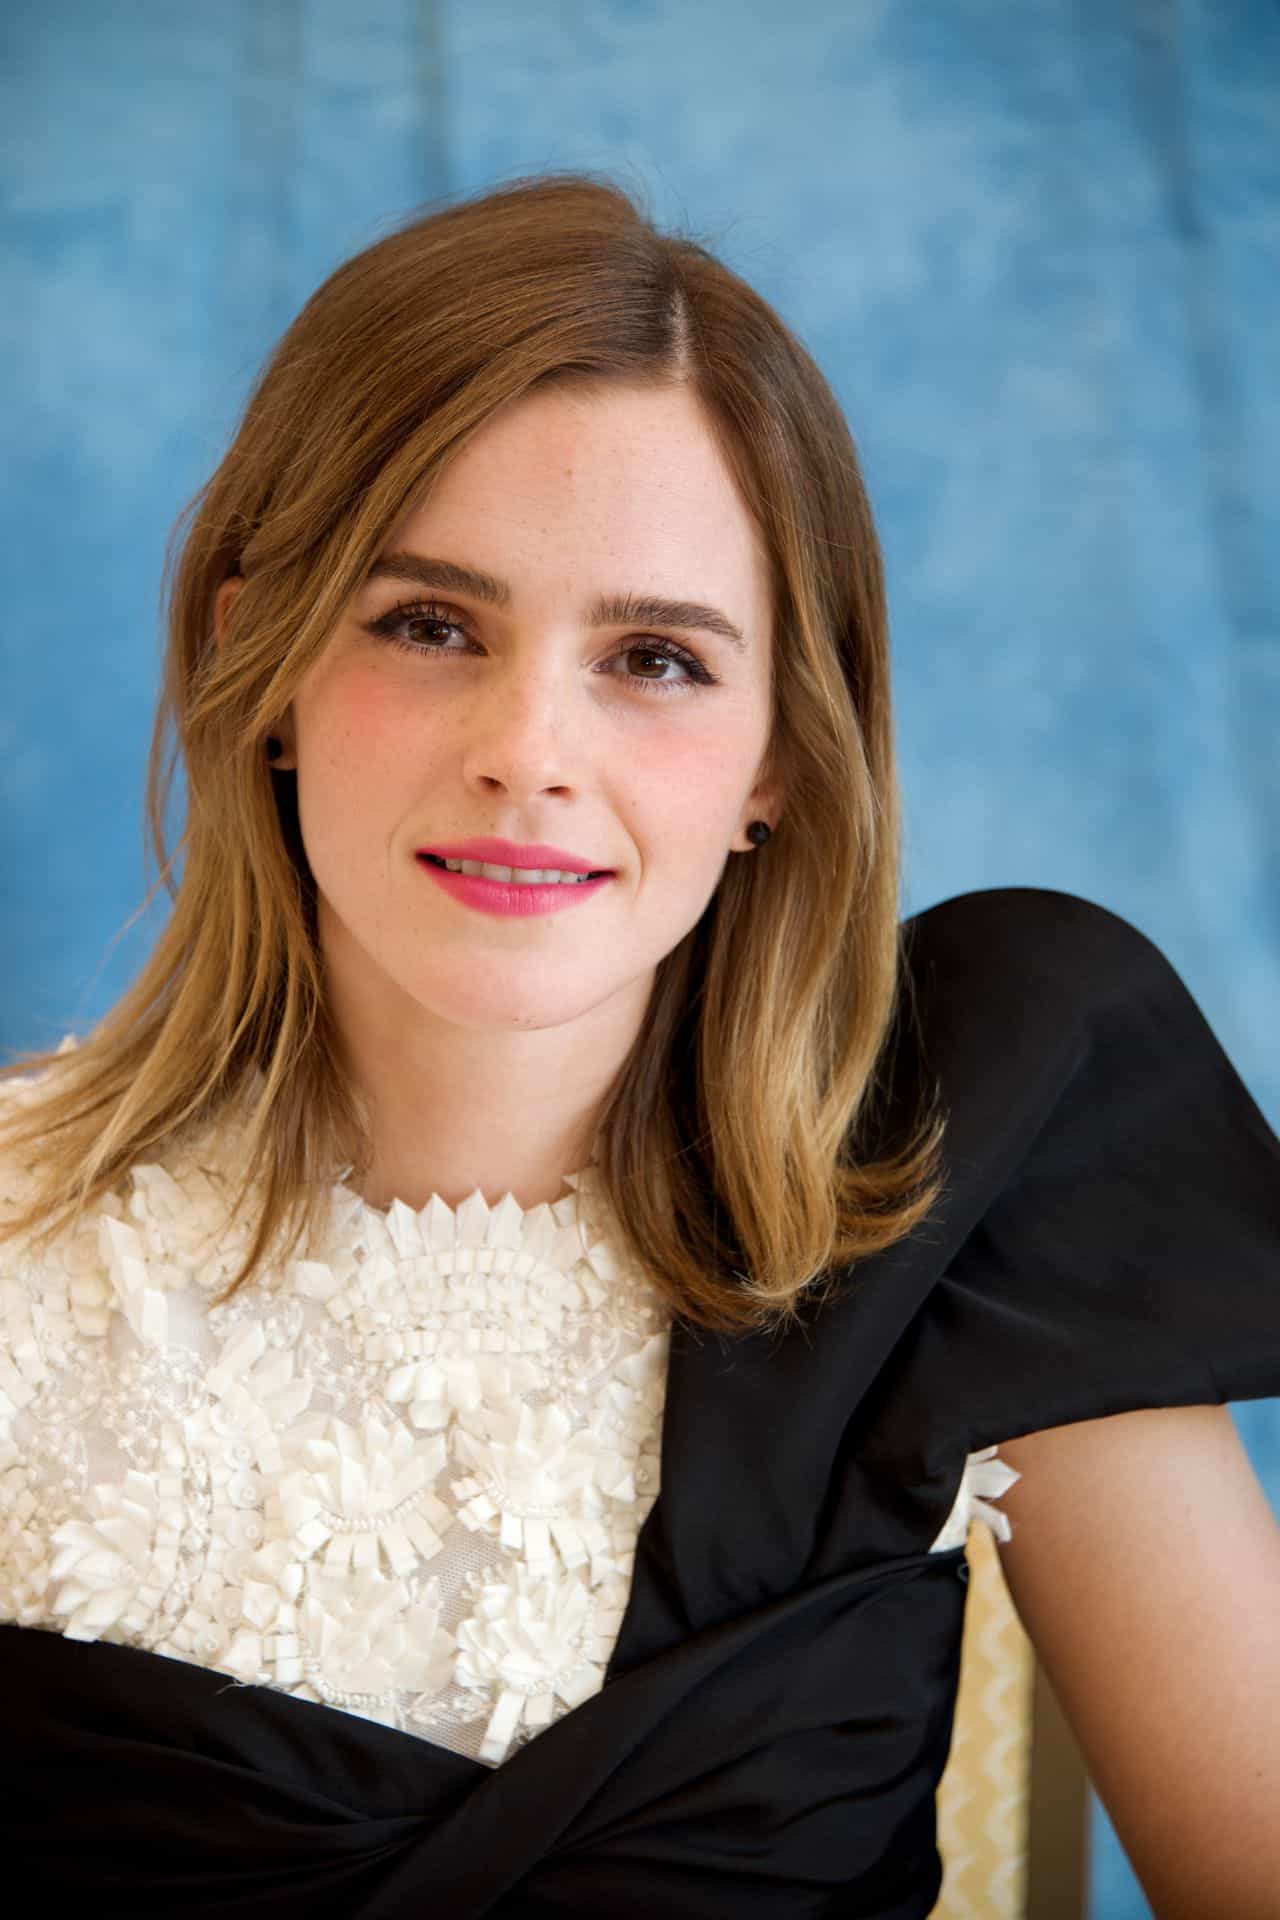 Emma Watson Oozes Beauty at the Press Conference at the Maybourne Hotel